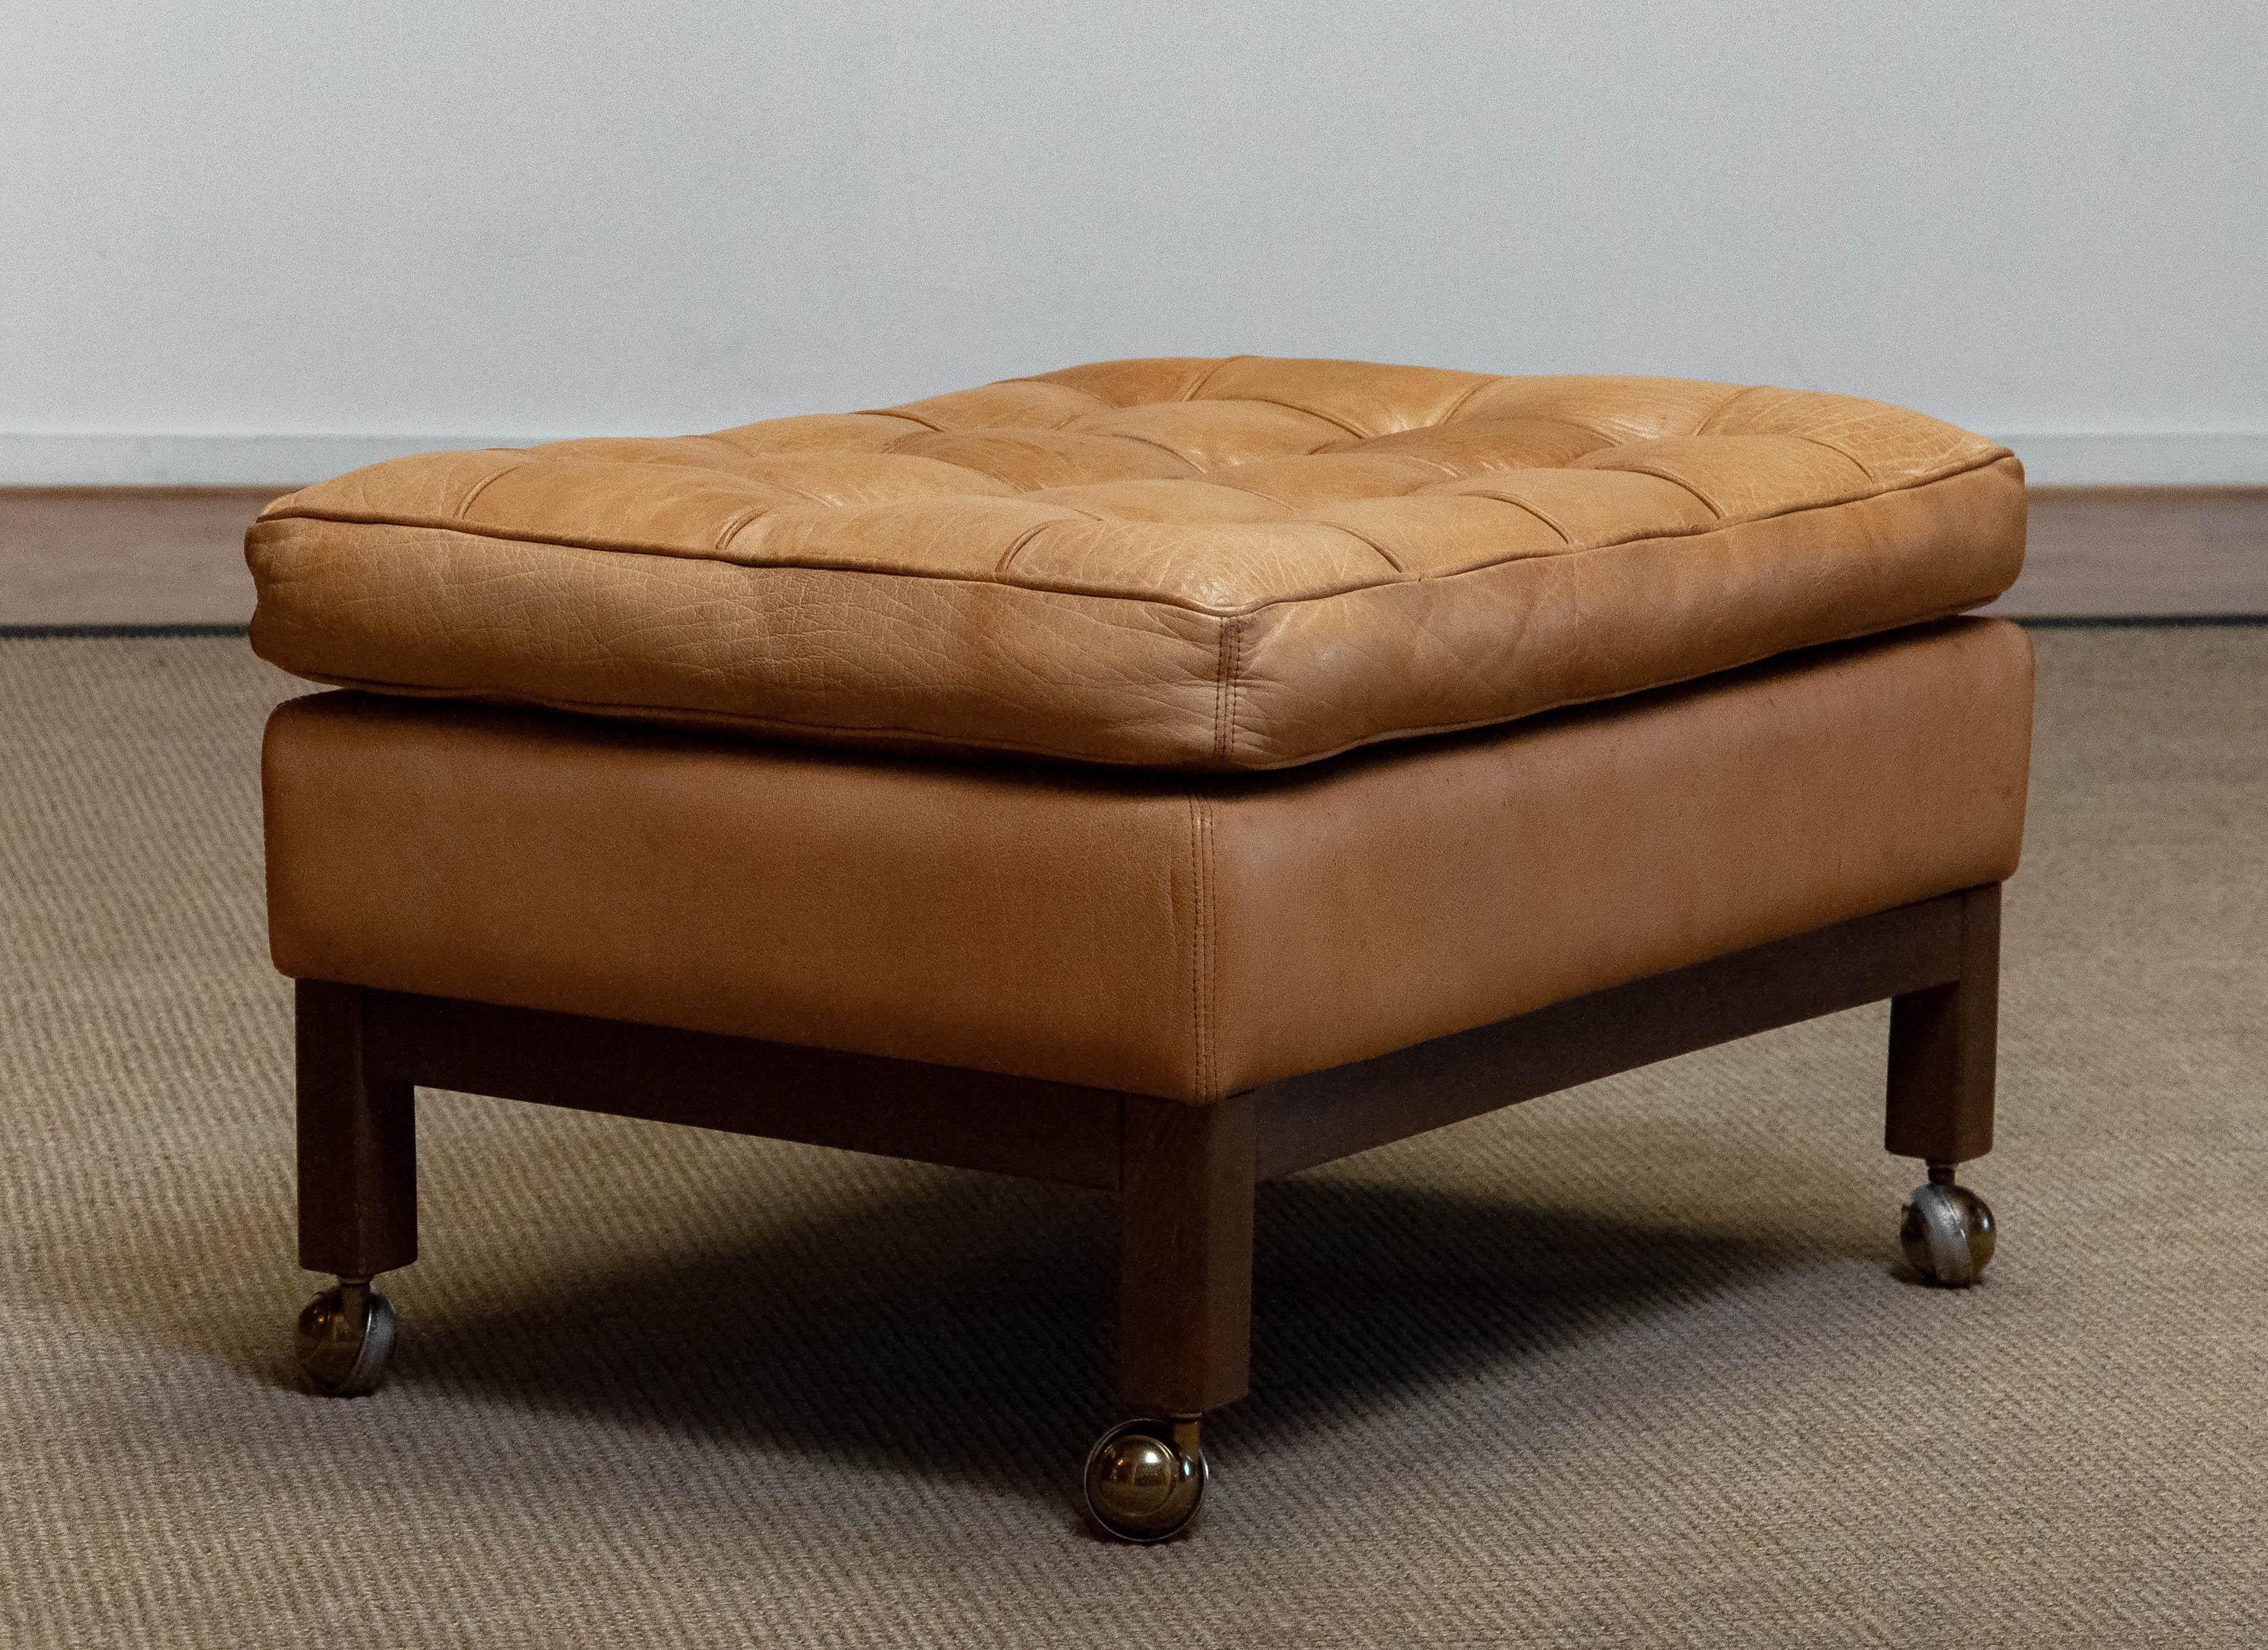 1970s Camel / Brown Colored Leather Ottoman Model 'Merkur' by Arne Norell For Sale 1